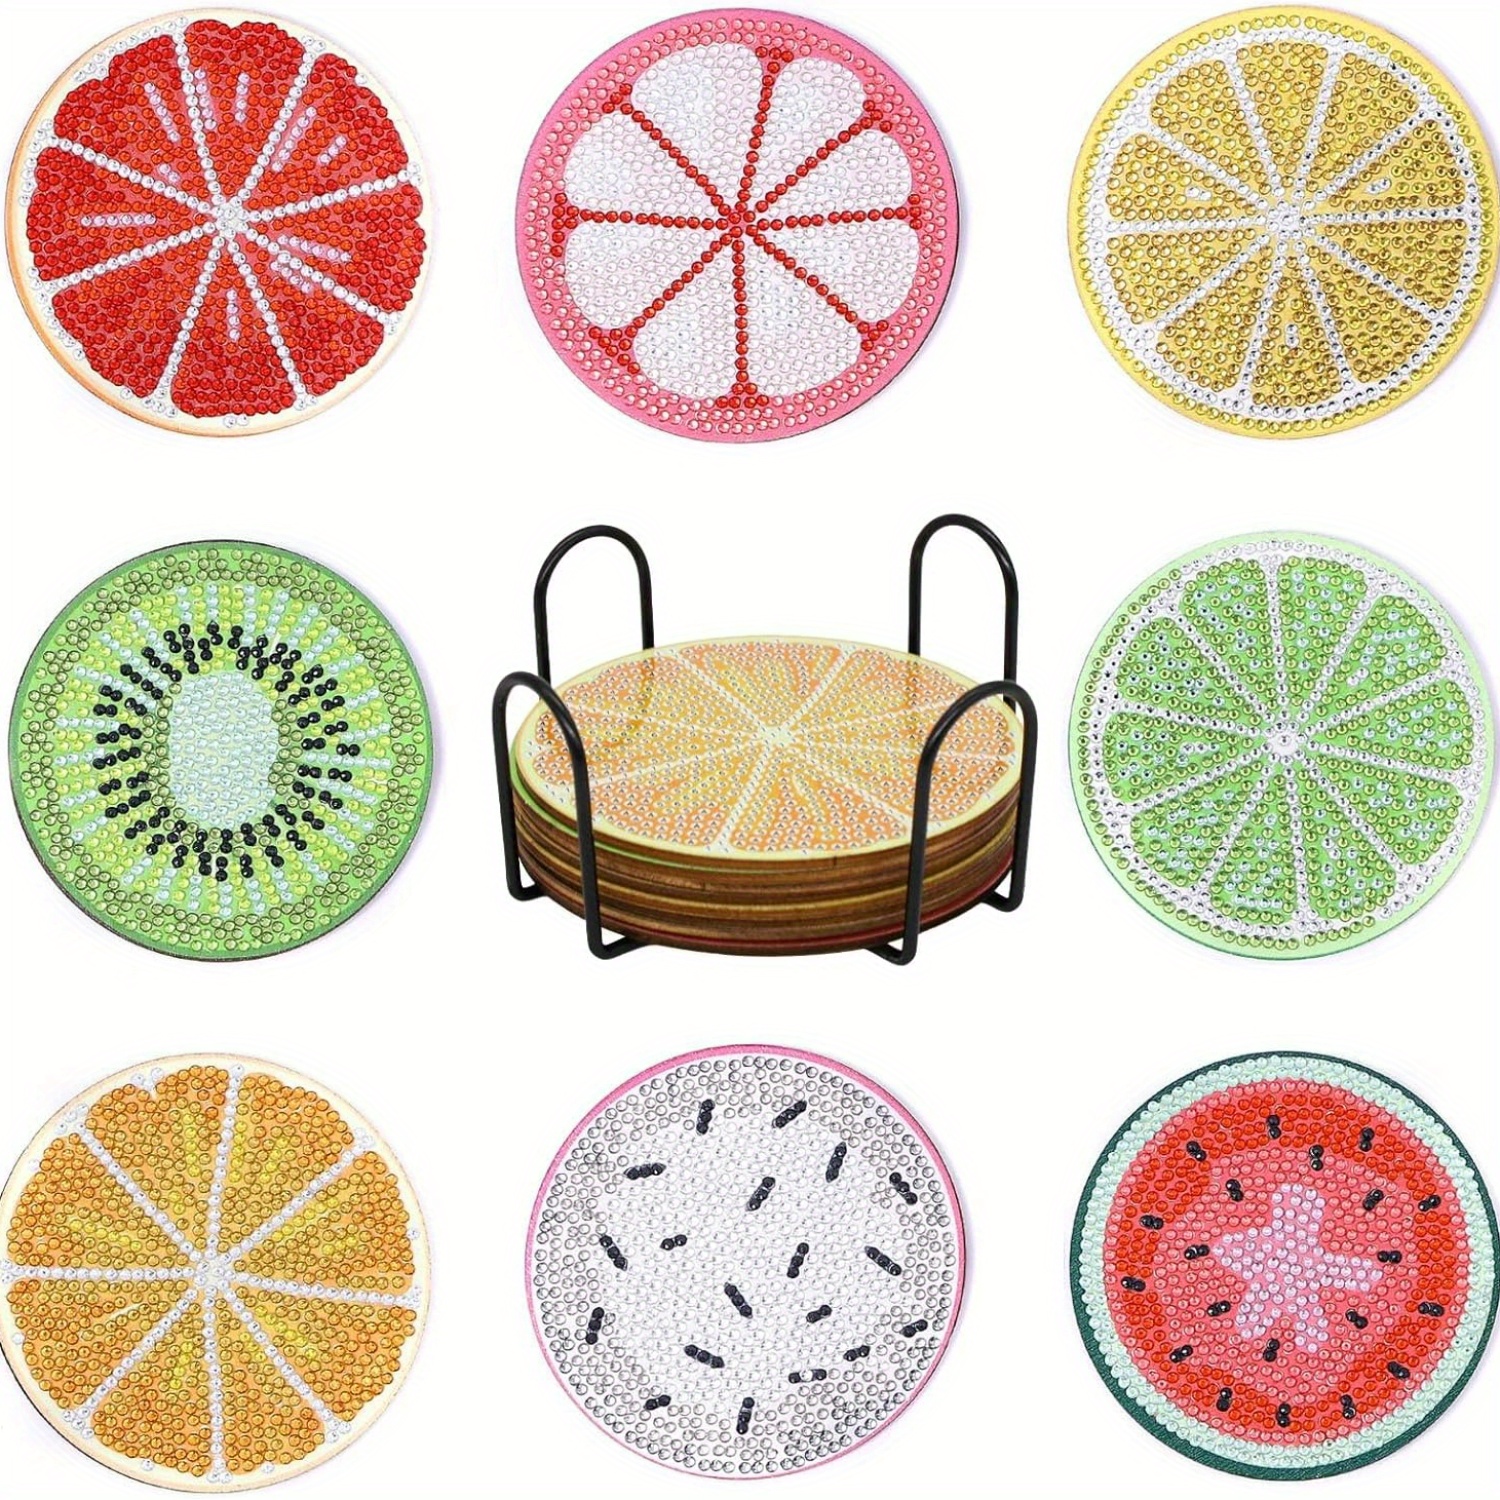 BSRESIN 8 Pcs Fruit Diamond Painting Coasters with Holder, Crafts